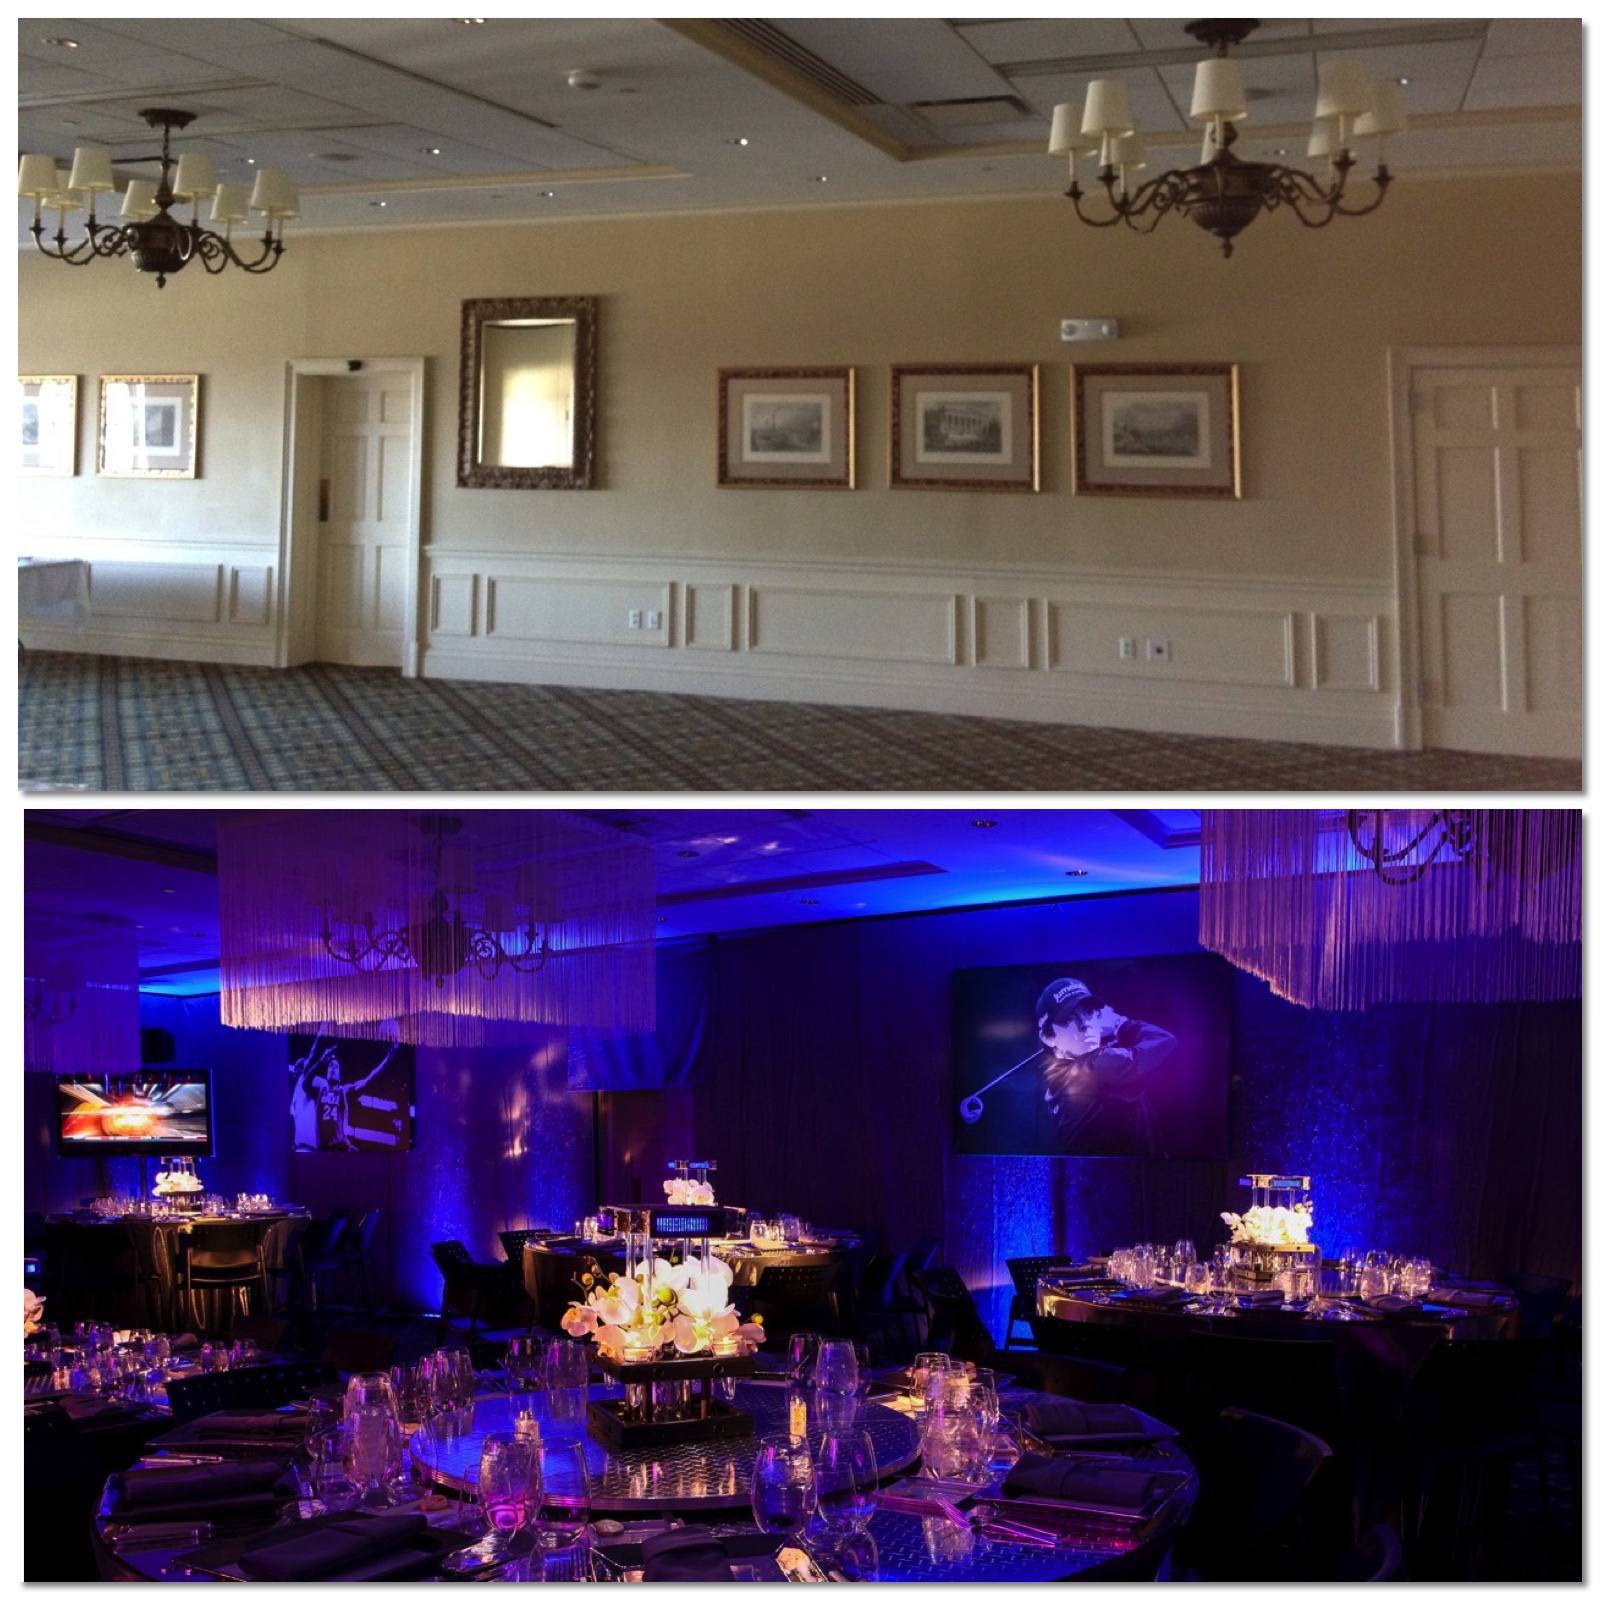 Greenbrook Country Club SportsCenter Theme Bar Mitzvah Design Centerpiece Before and After - Eggsotic Events NJ NYC Event Design Lighting Decor Drape Rental NJ NYC .jpg